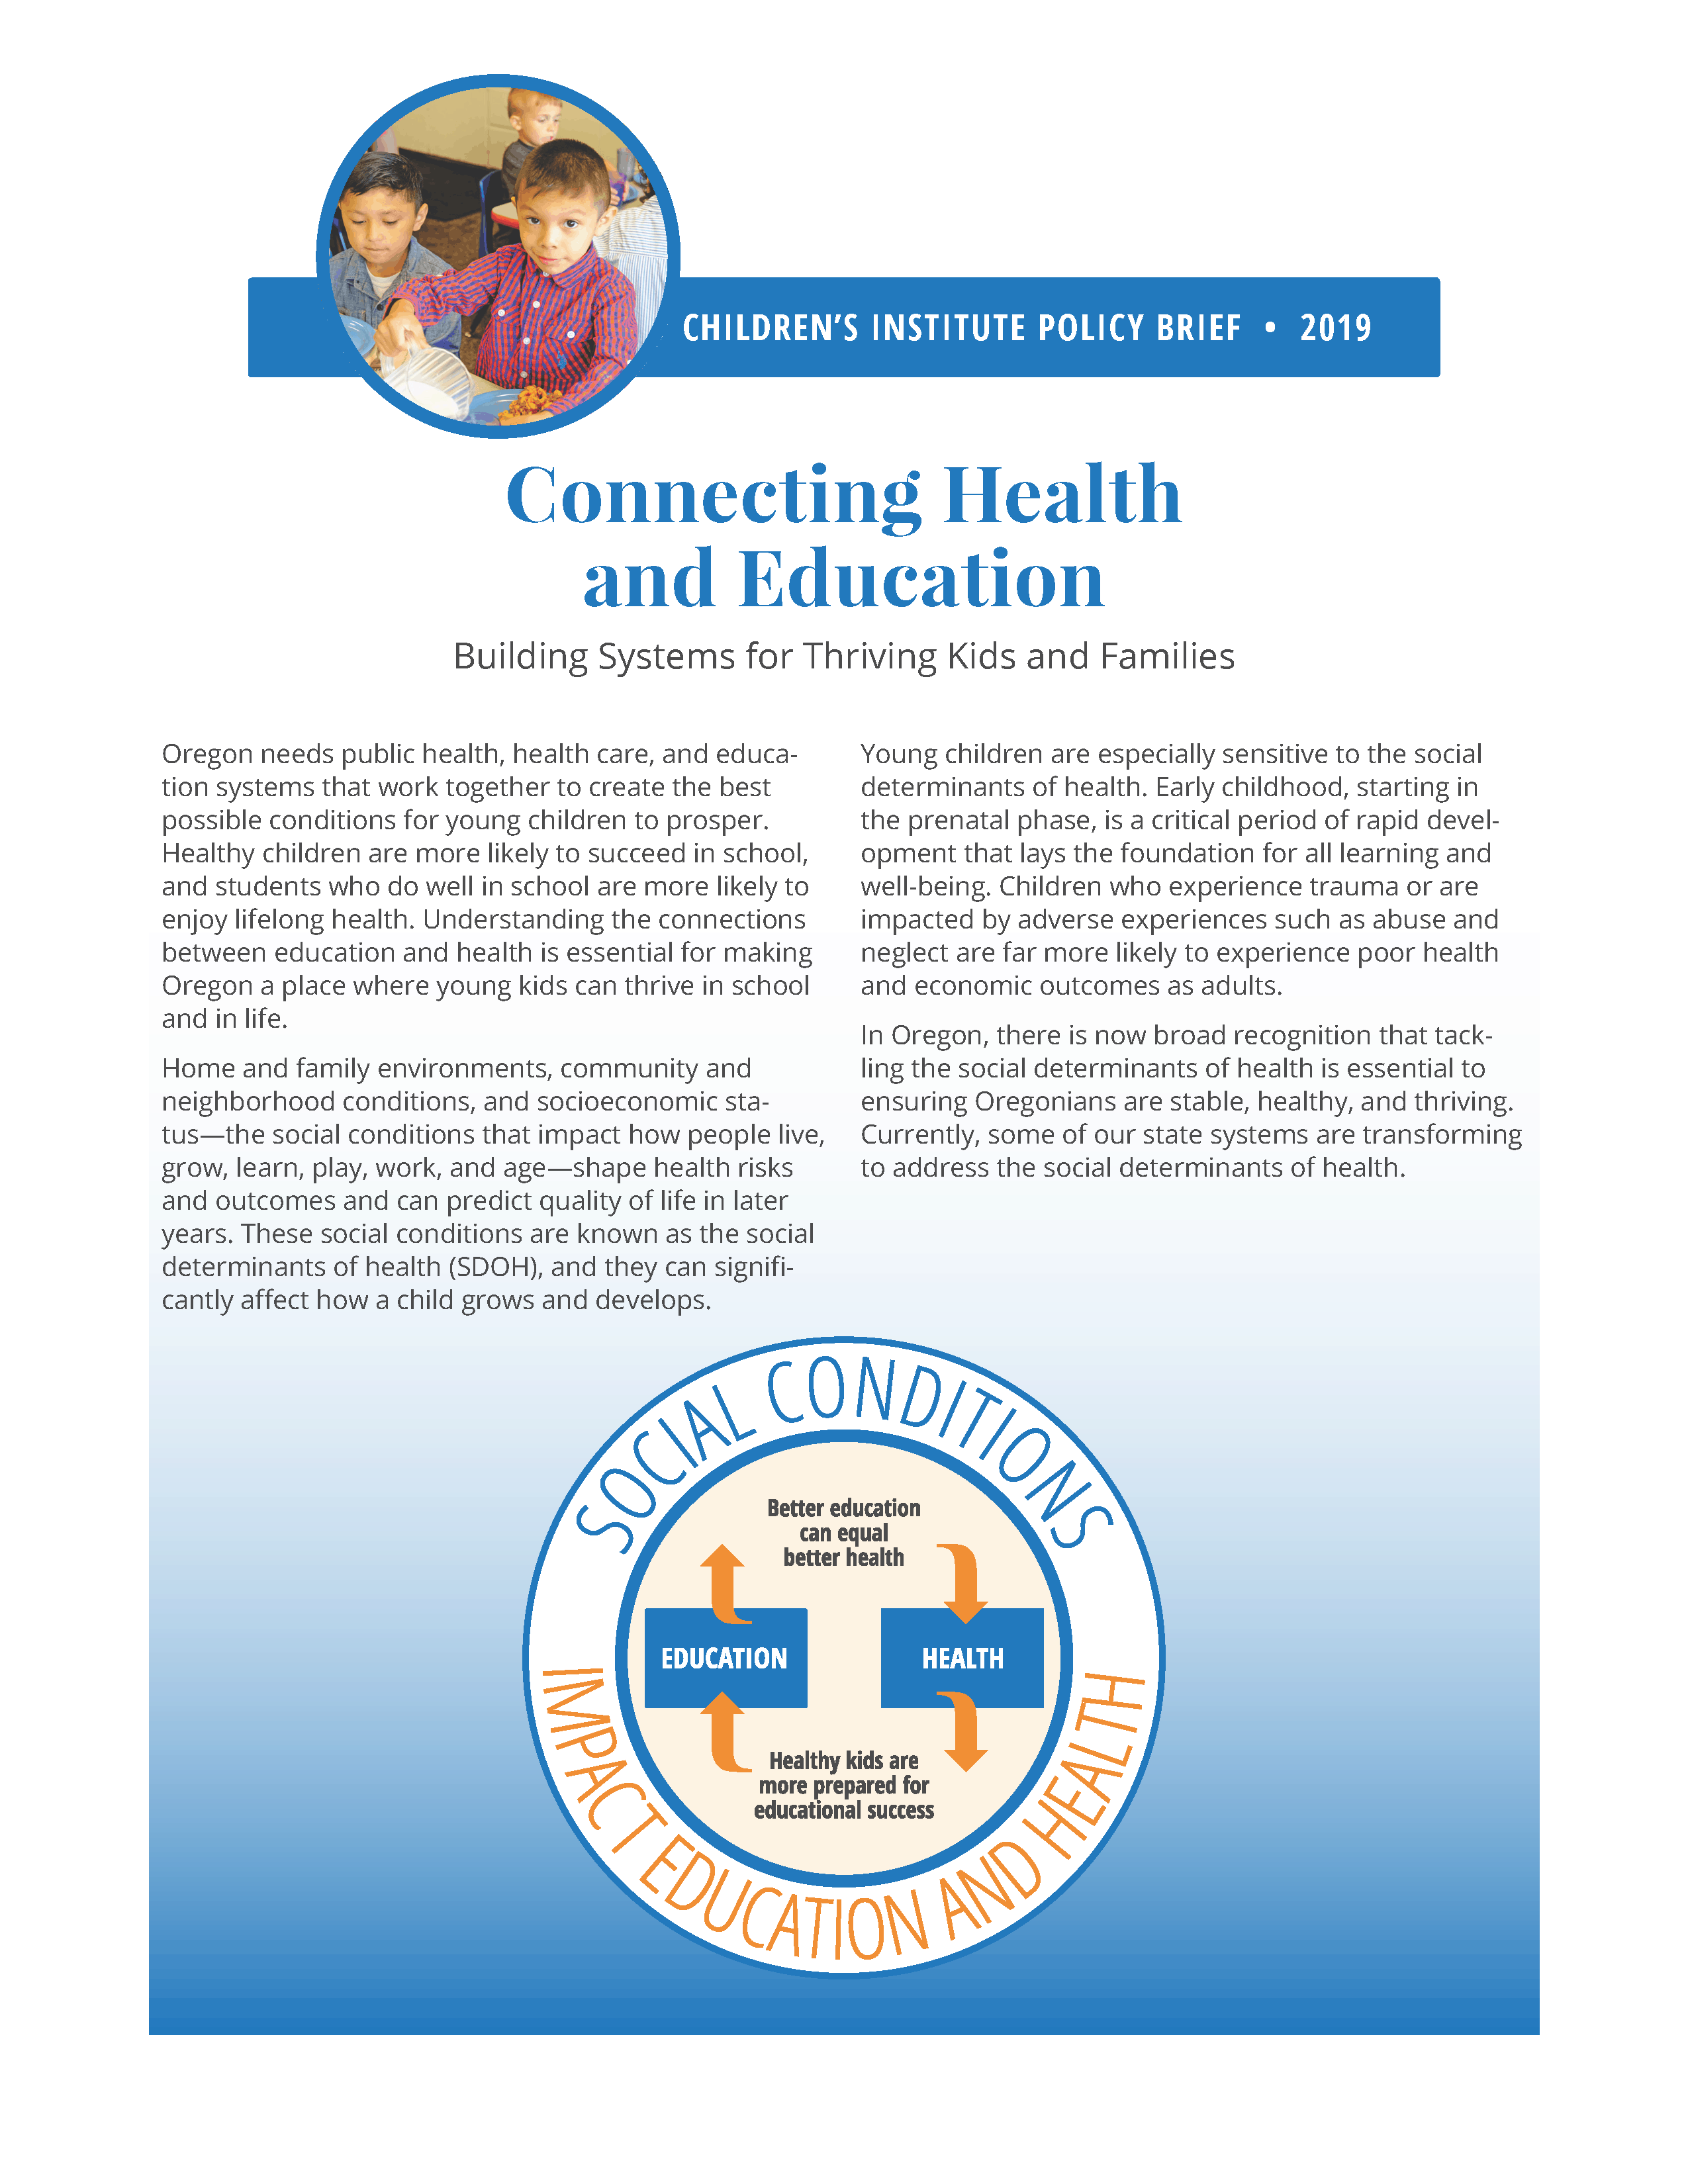 Connecting Health and Education